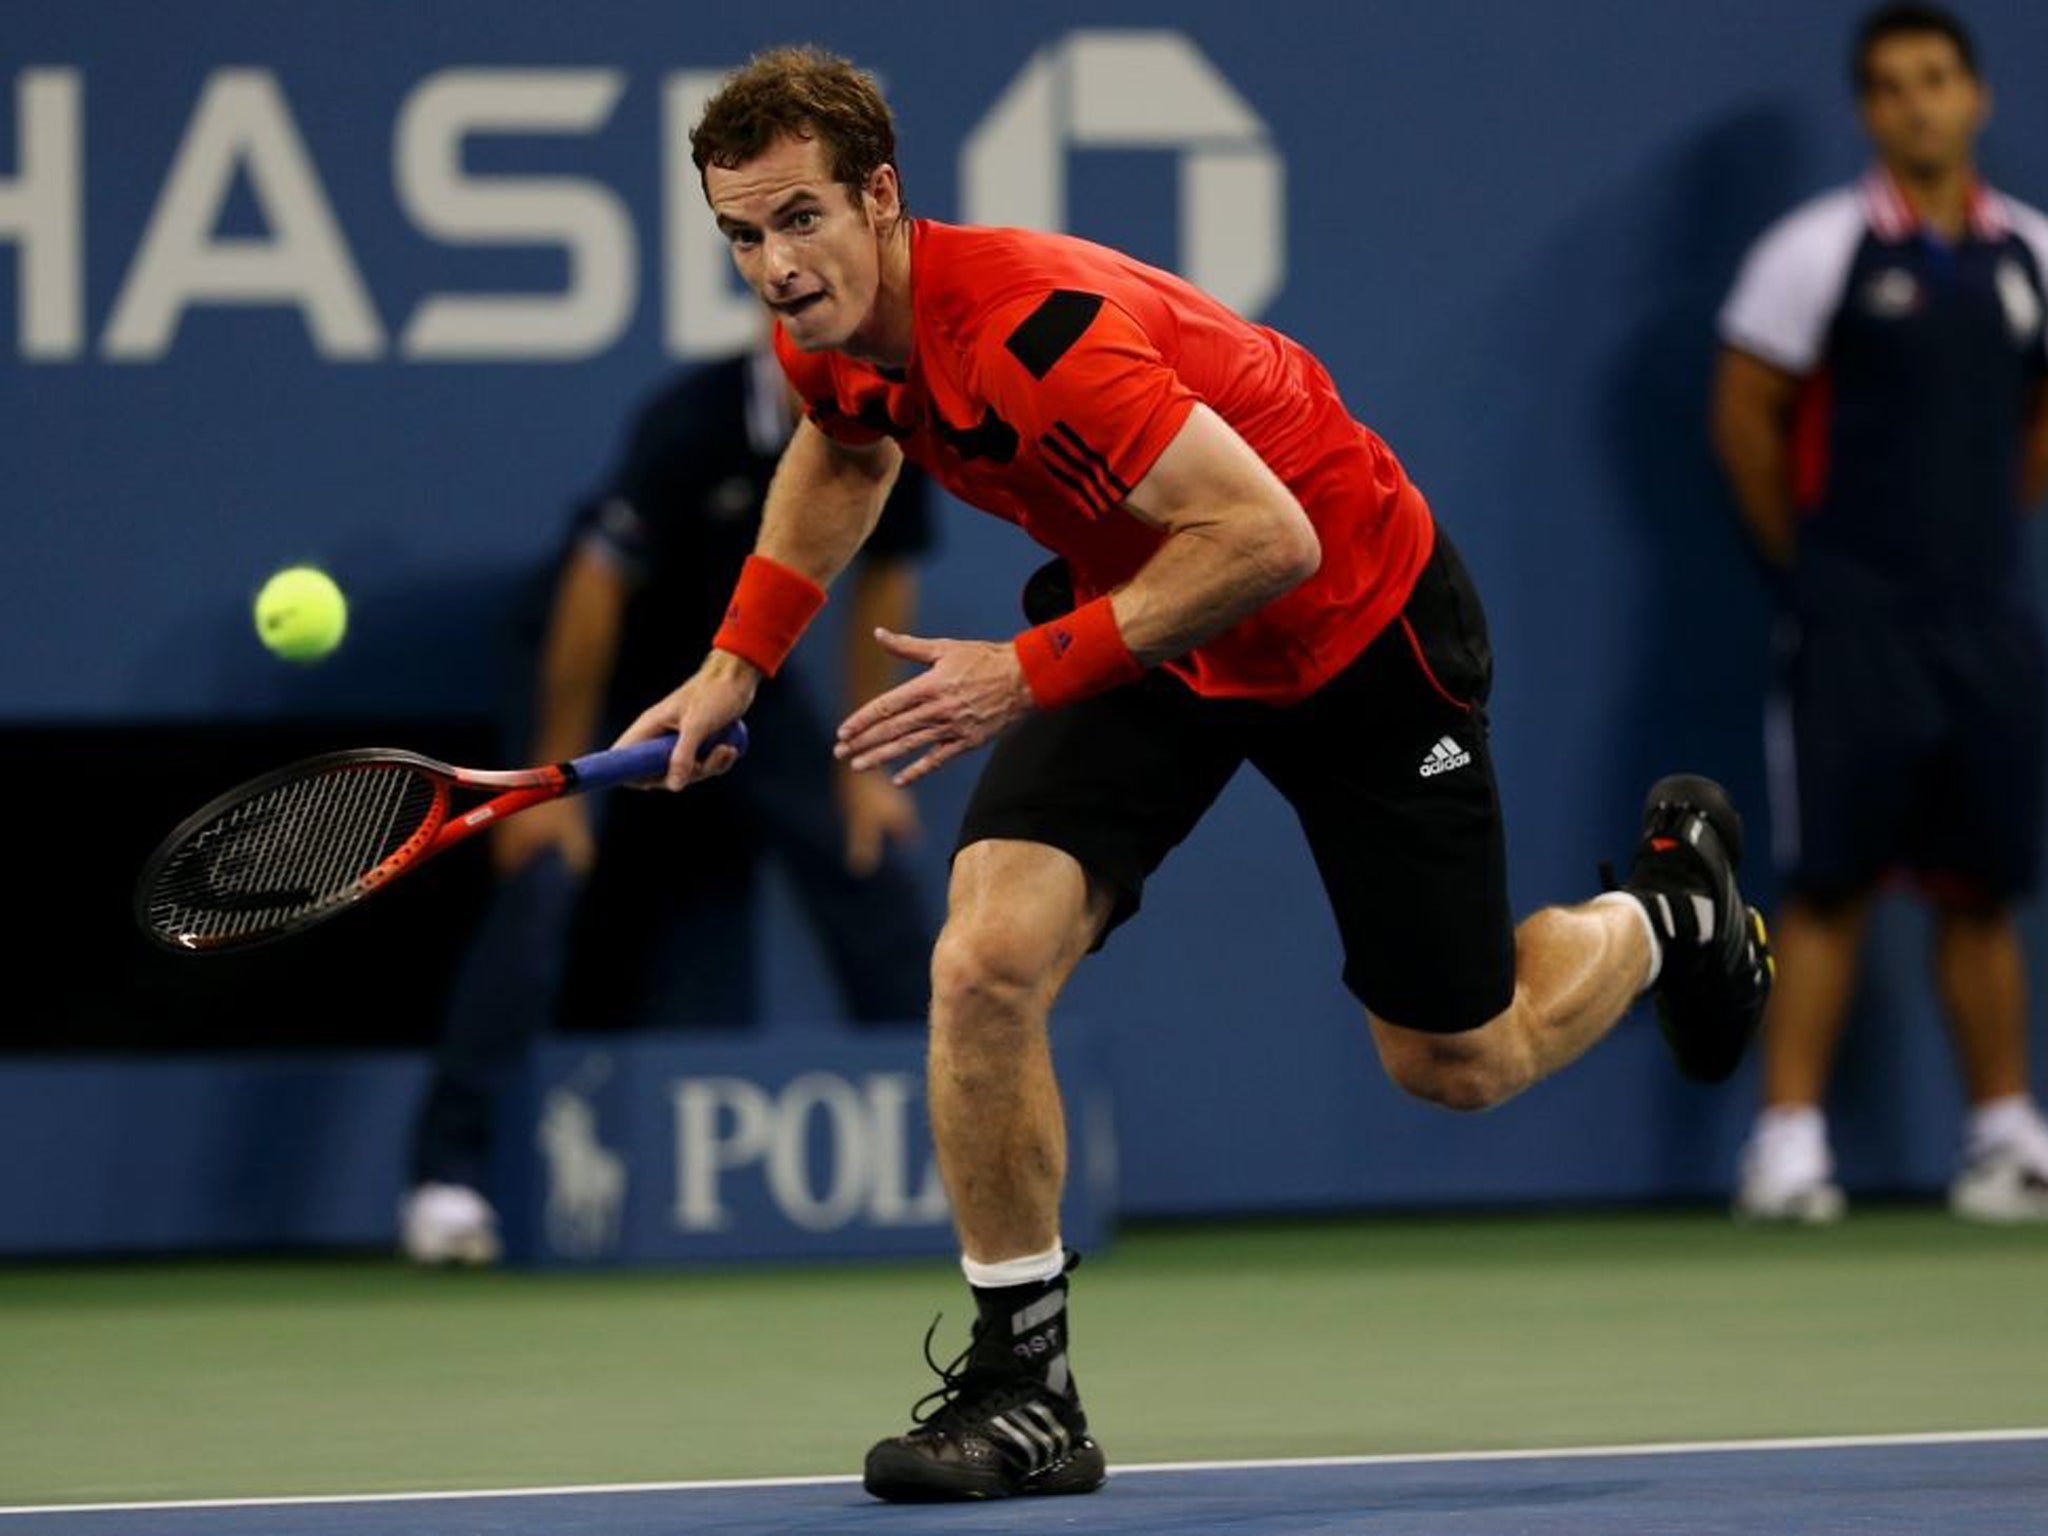 This was Murray’s first appearance in New York since his victory in last year’s final against Novak Djokovic